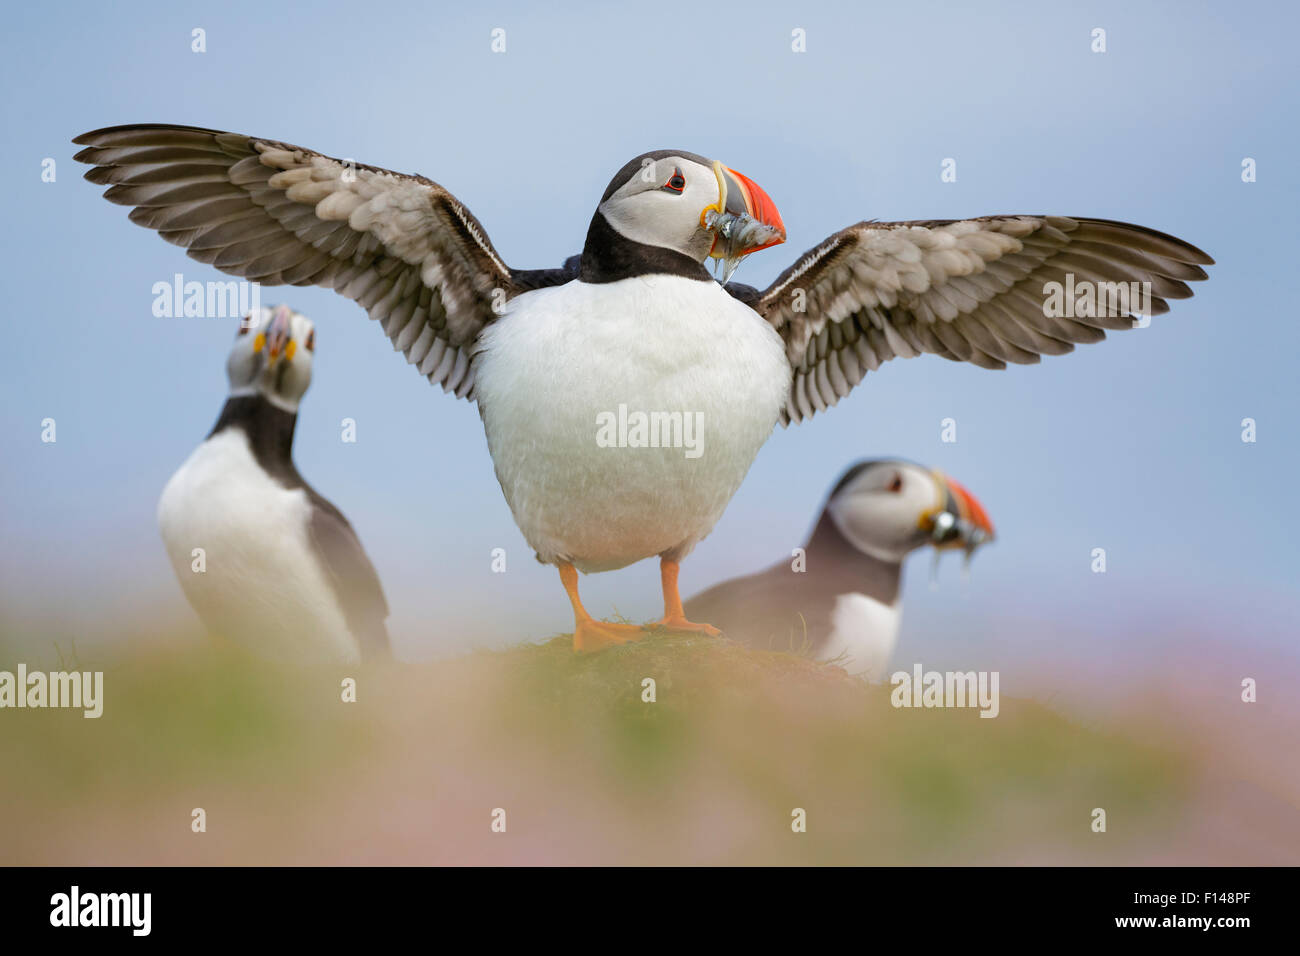 Puffin (Fratercula arctica) standing on Sea thrift (Armeria maritima) with wings out stretched with a beak full of sand eels. Close-up portrait. Fair Island, Shetland Islands, Scotland, July. Stock Photo